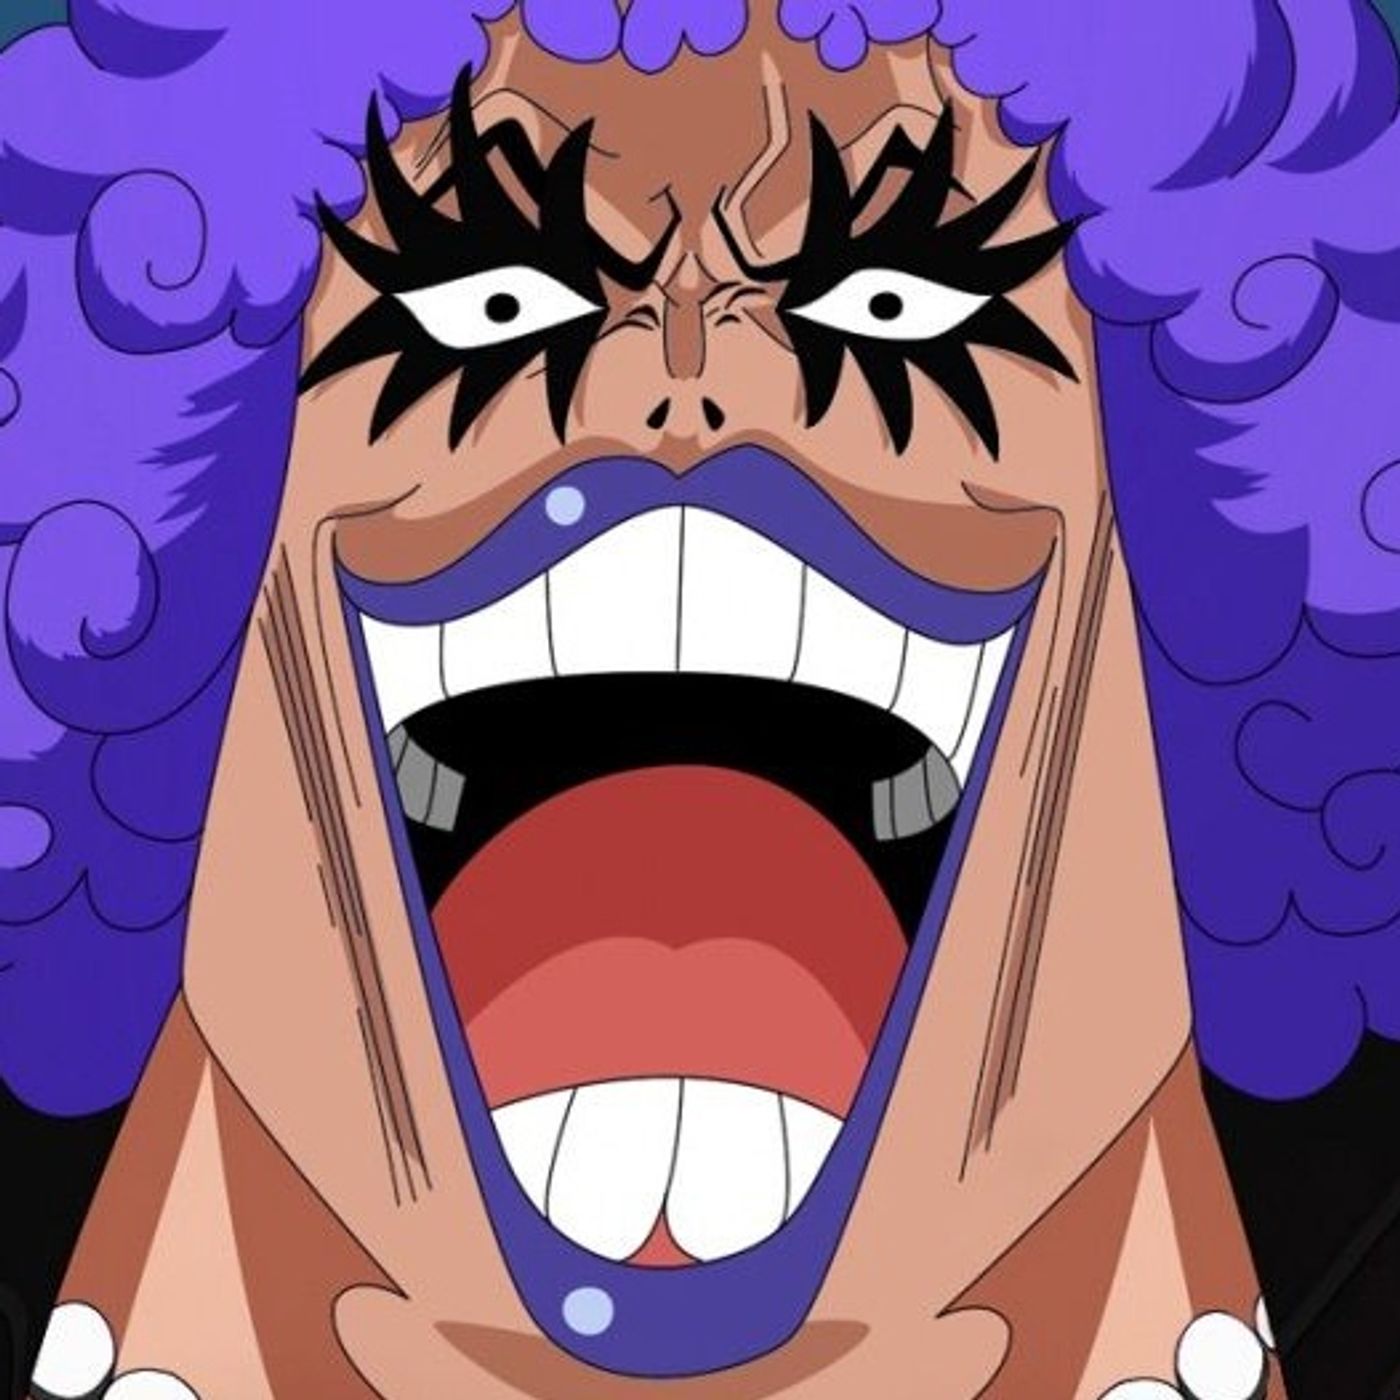 Impel Down Chapters 525 549 The One Piece Virgin Lyssna Har Poddtoppen Se